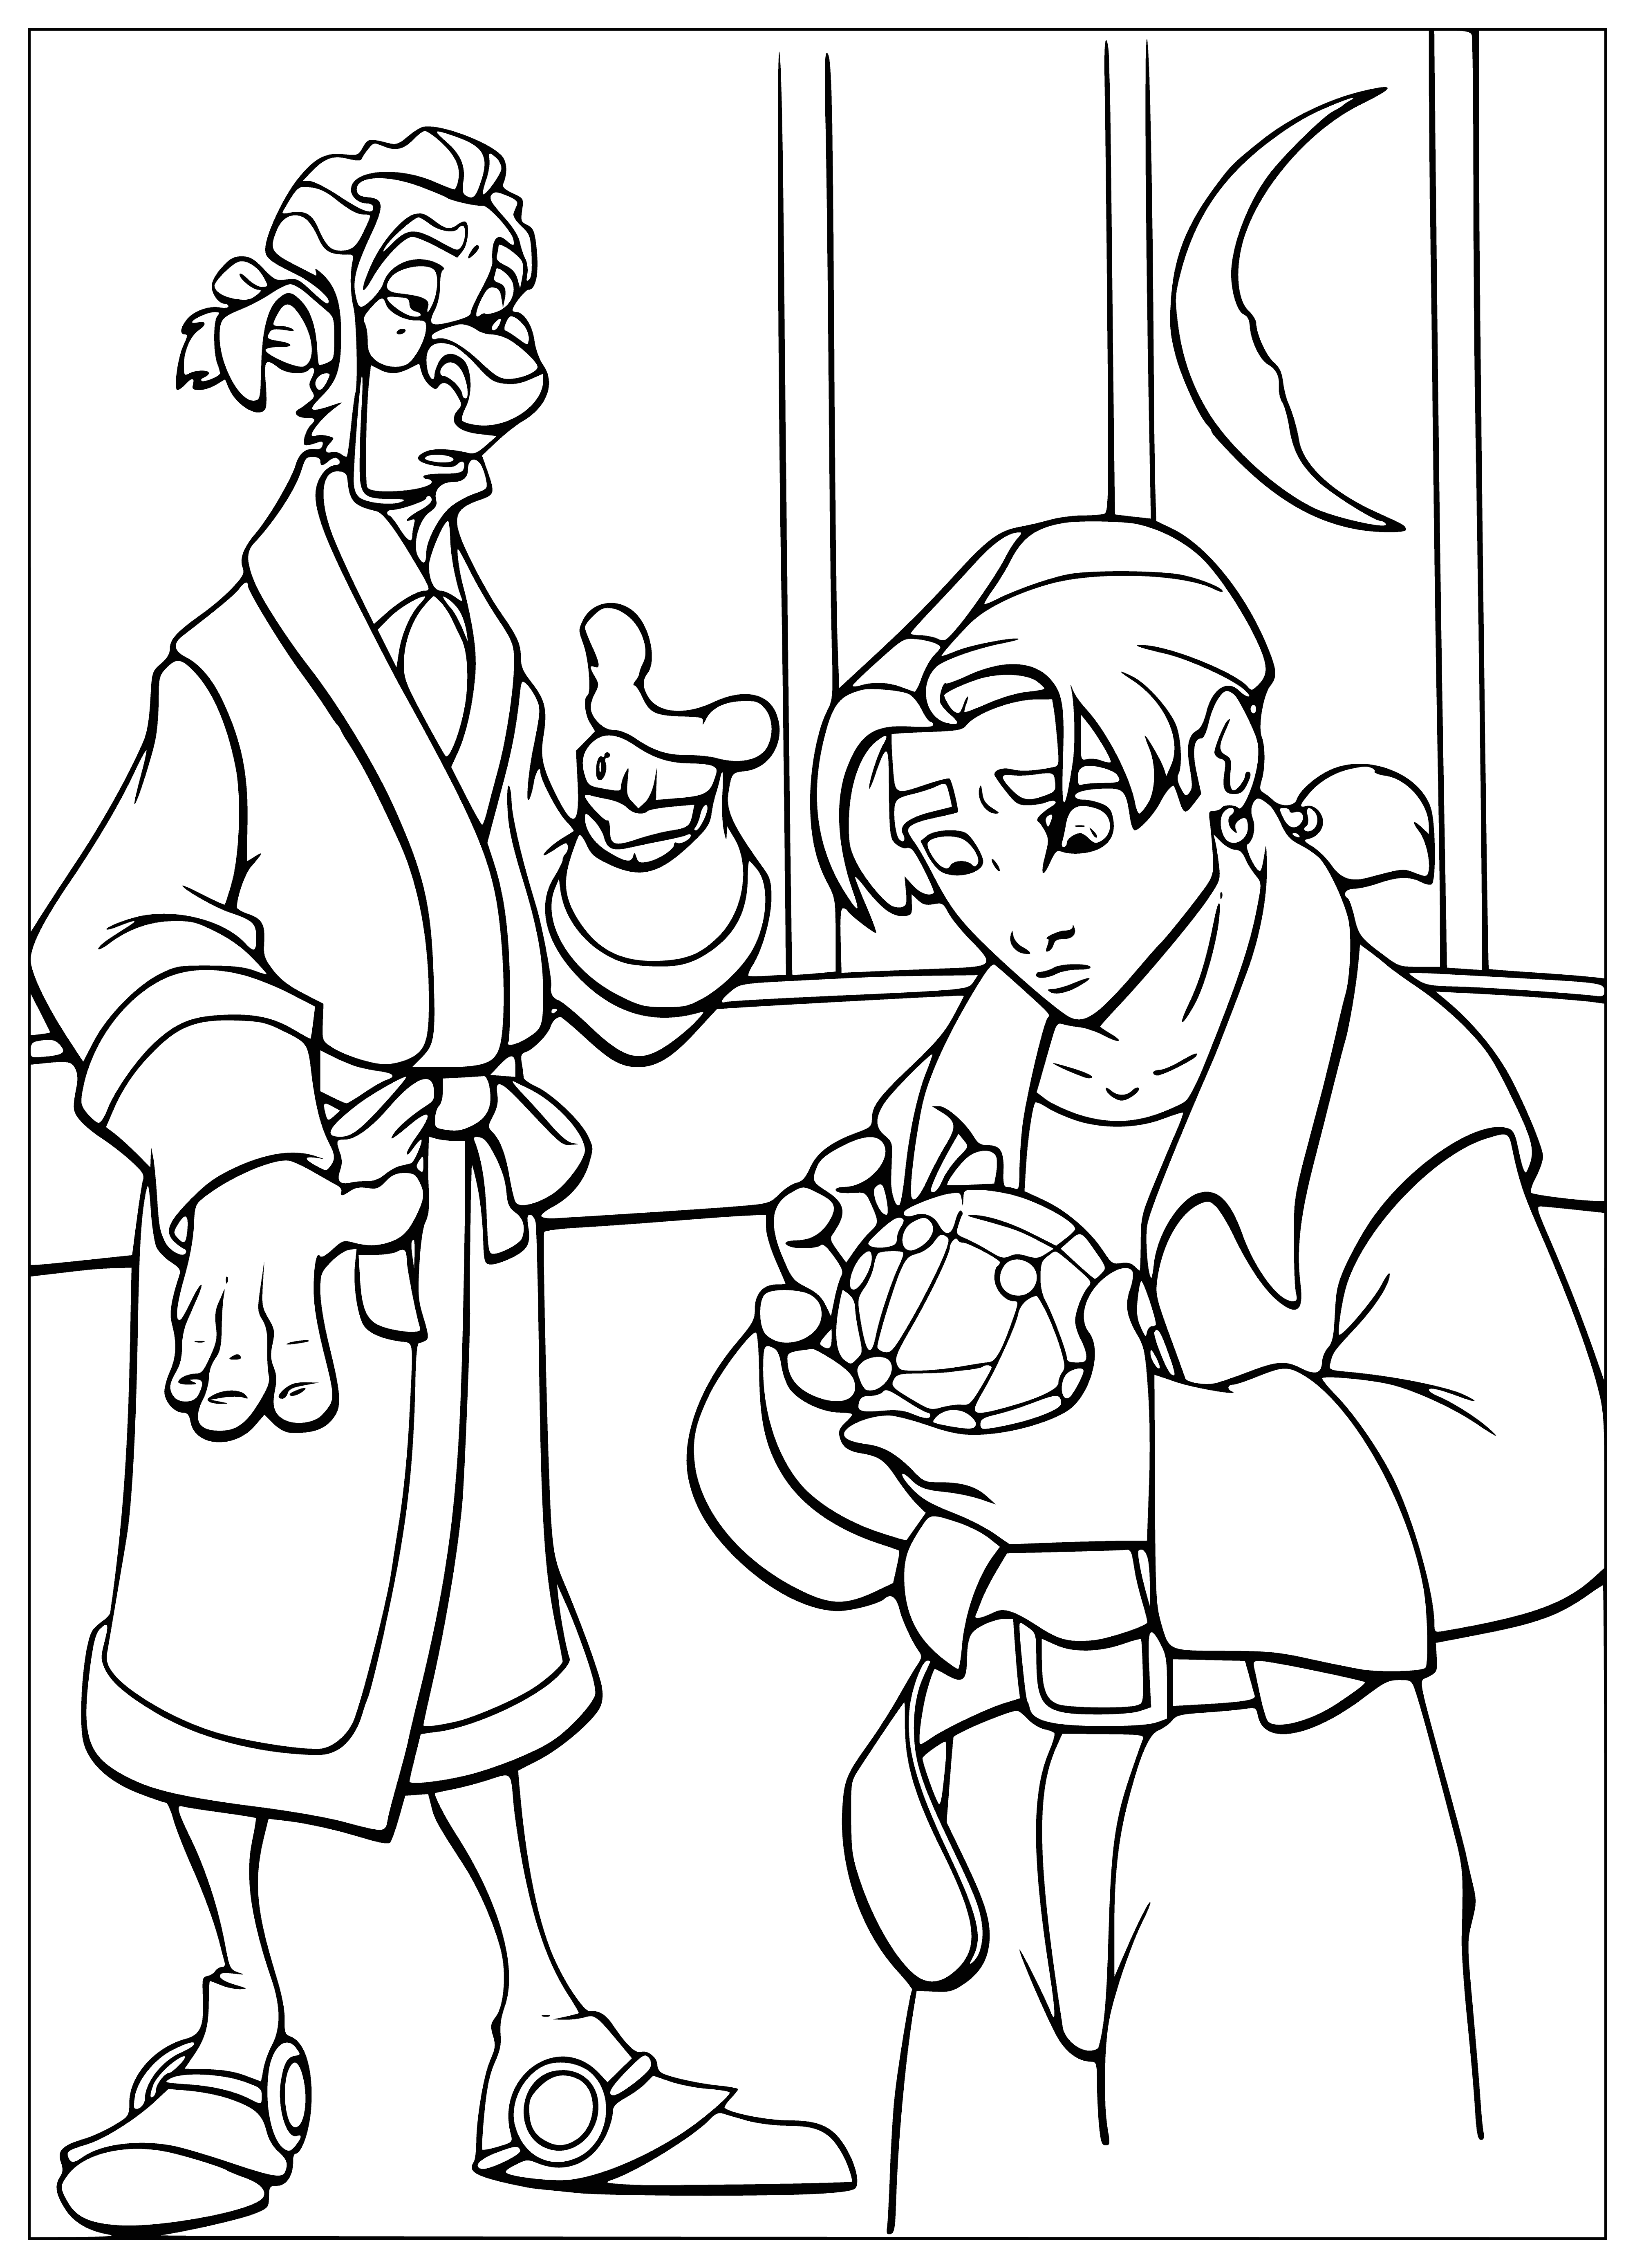 Dr. Livesey coloring page